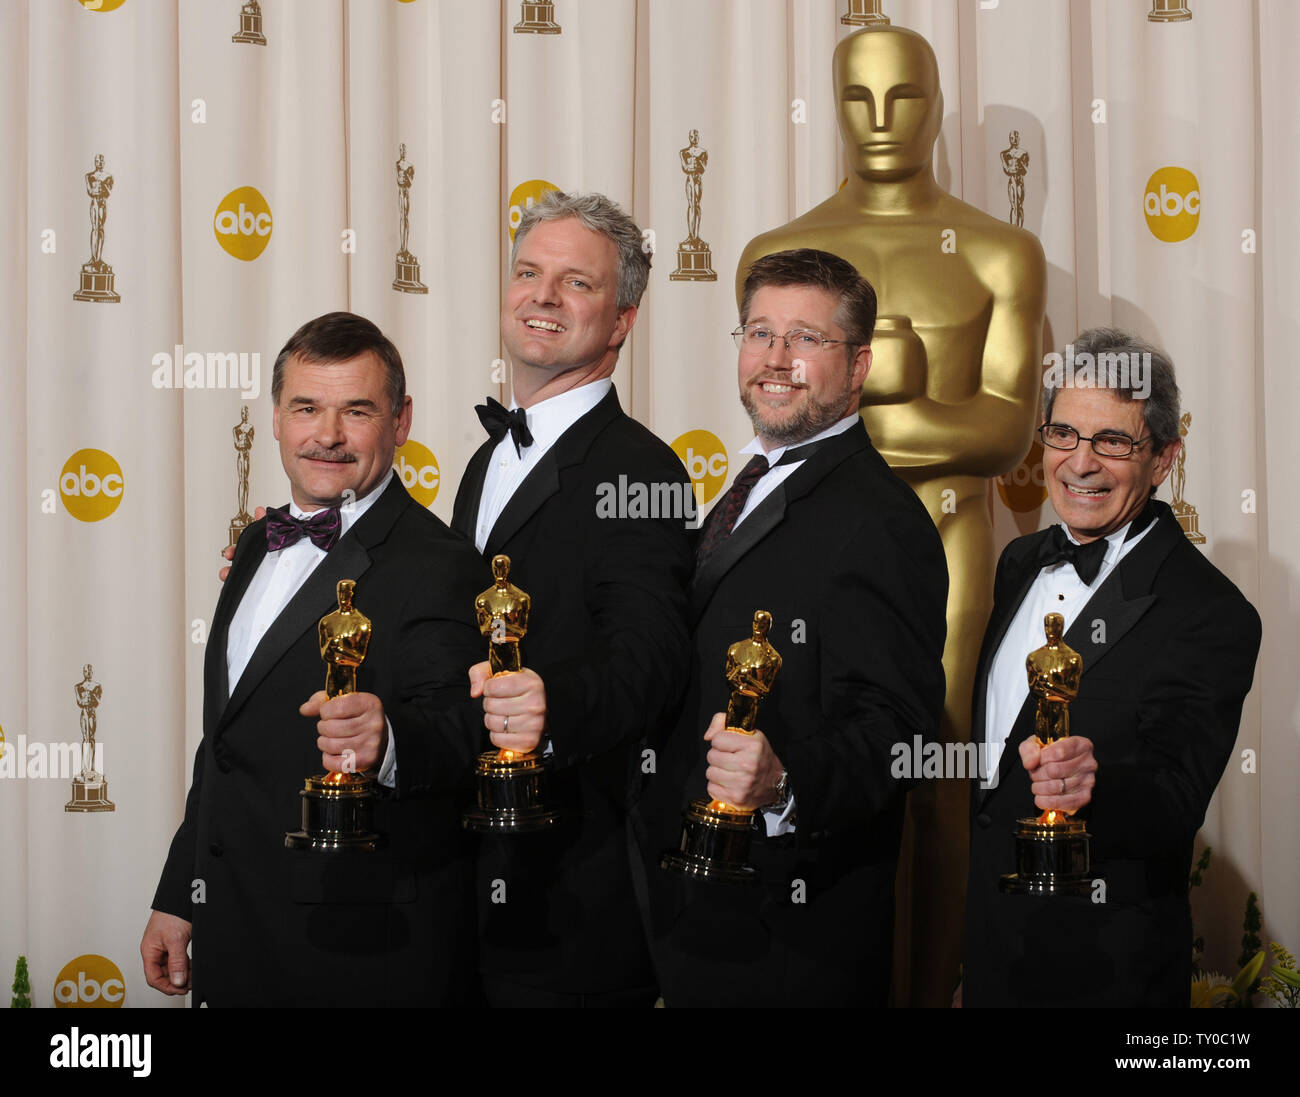 Michael Fink, Bill Westenhofer, Ben Morris, and Trevor Wood pose with their Oscar for Achievement in Visual Effects for 'The Golden Compass' at the 80th Annual Academy Awards at the Kodak Theatre in Hollywood, California on February 24, 2008.  (UPI Photo/Jim Ruymen) Stock Photo